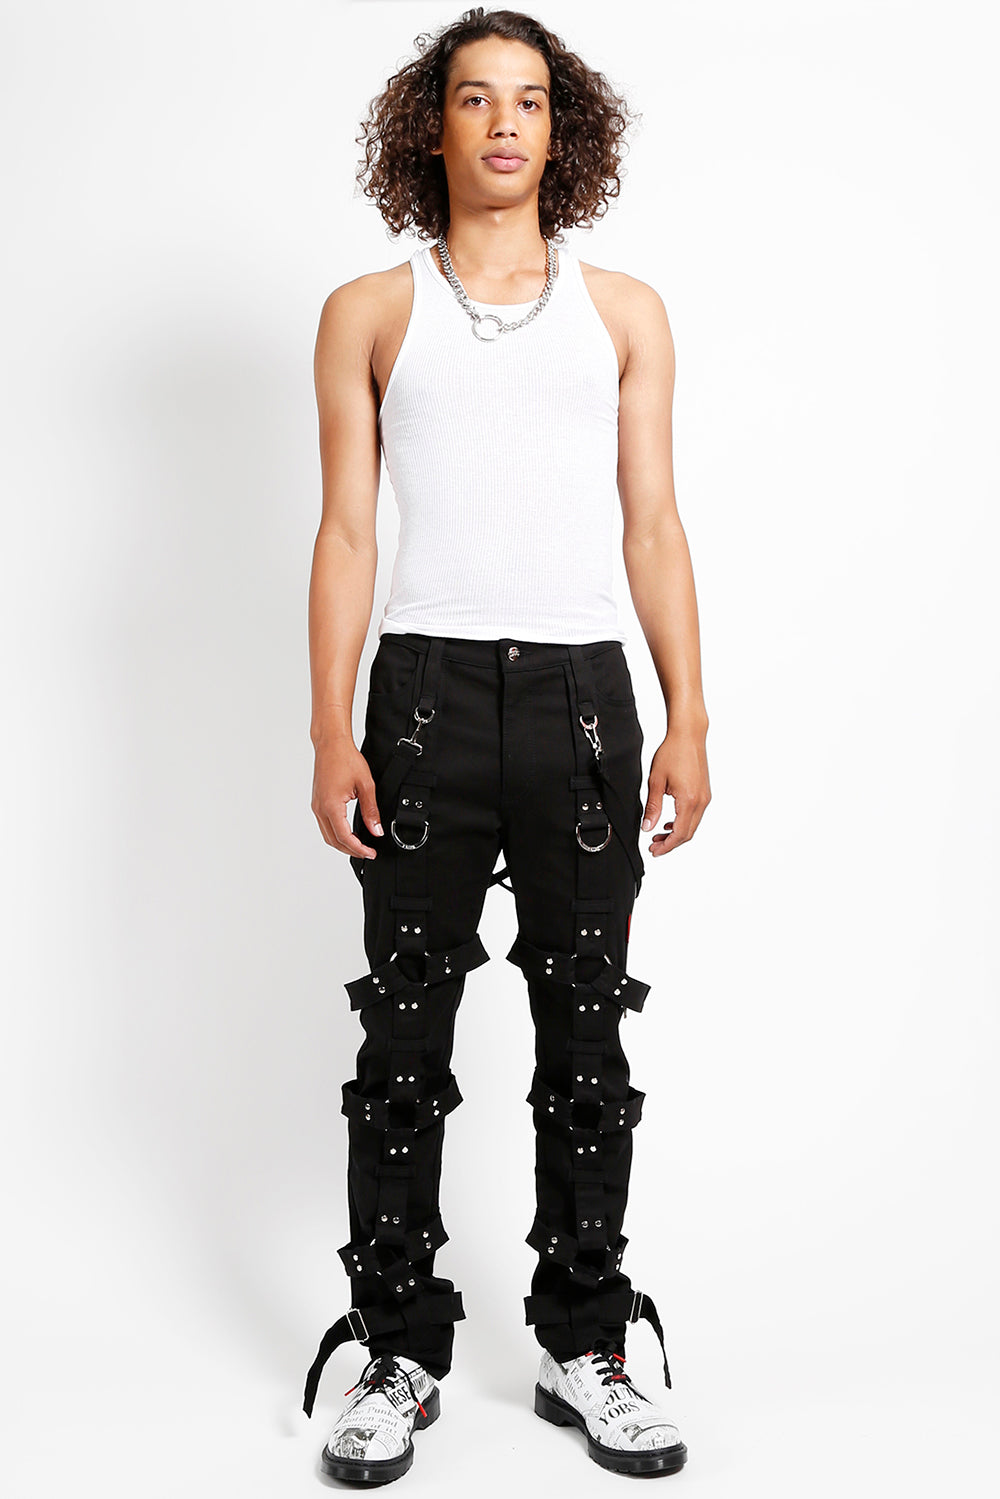 Gothic Men's Black Tripp Harness Pants: Embrace Your Individuality